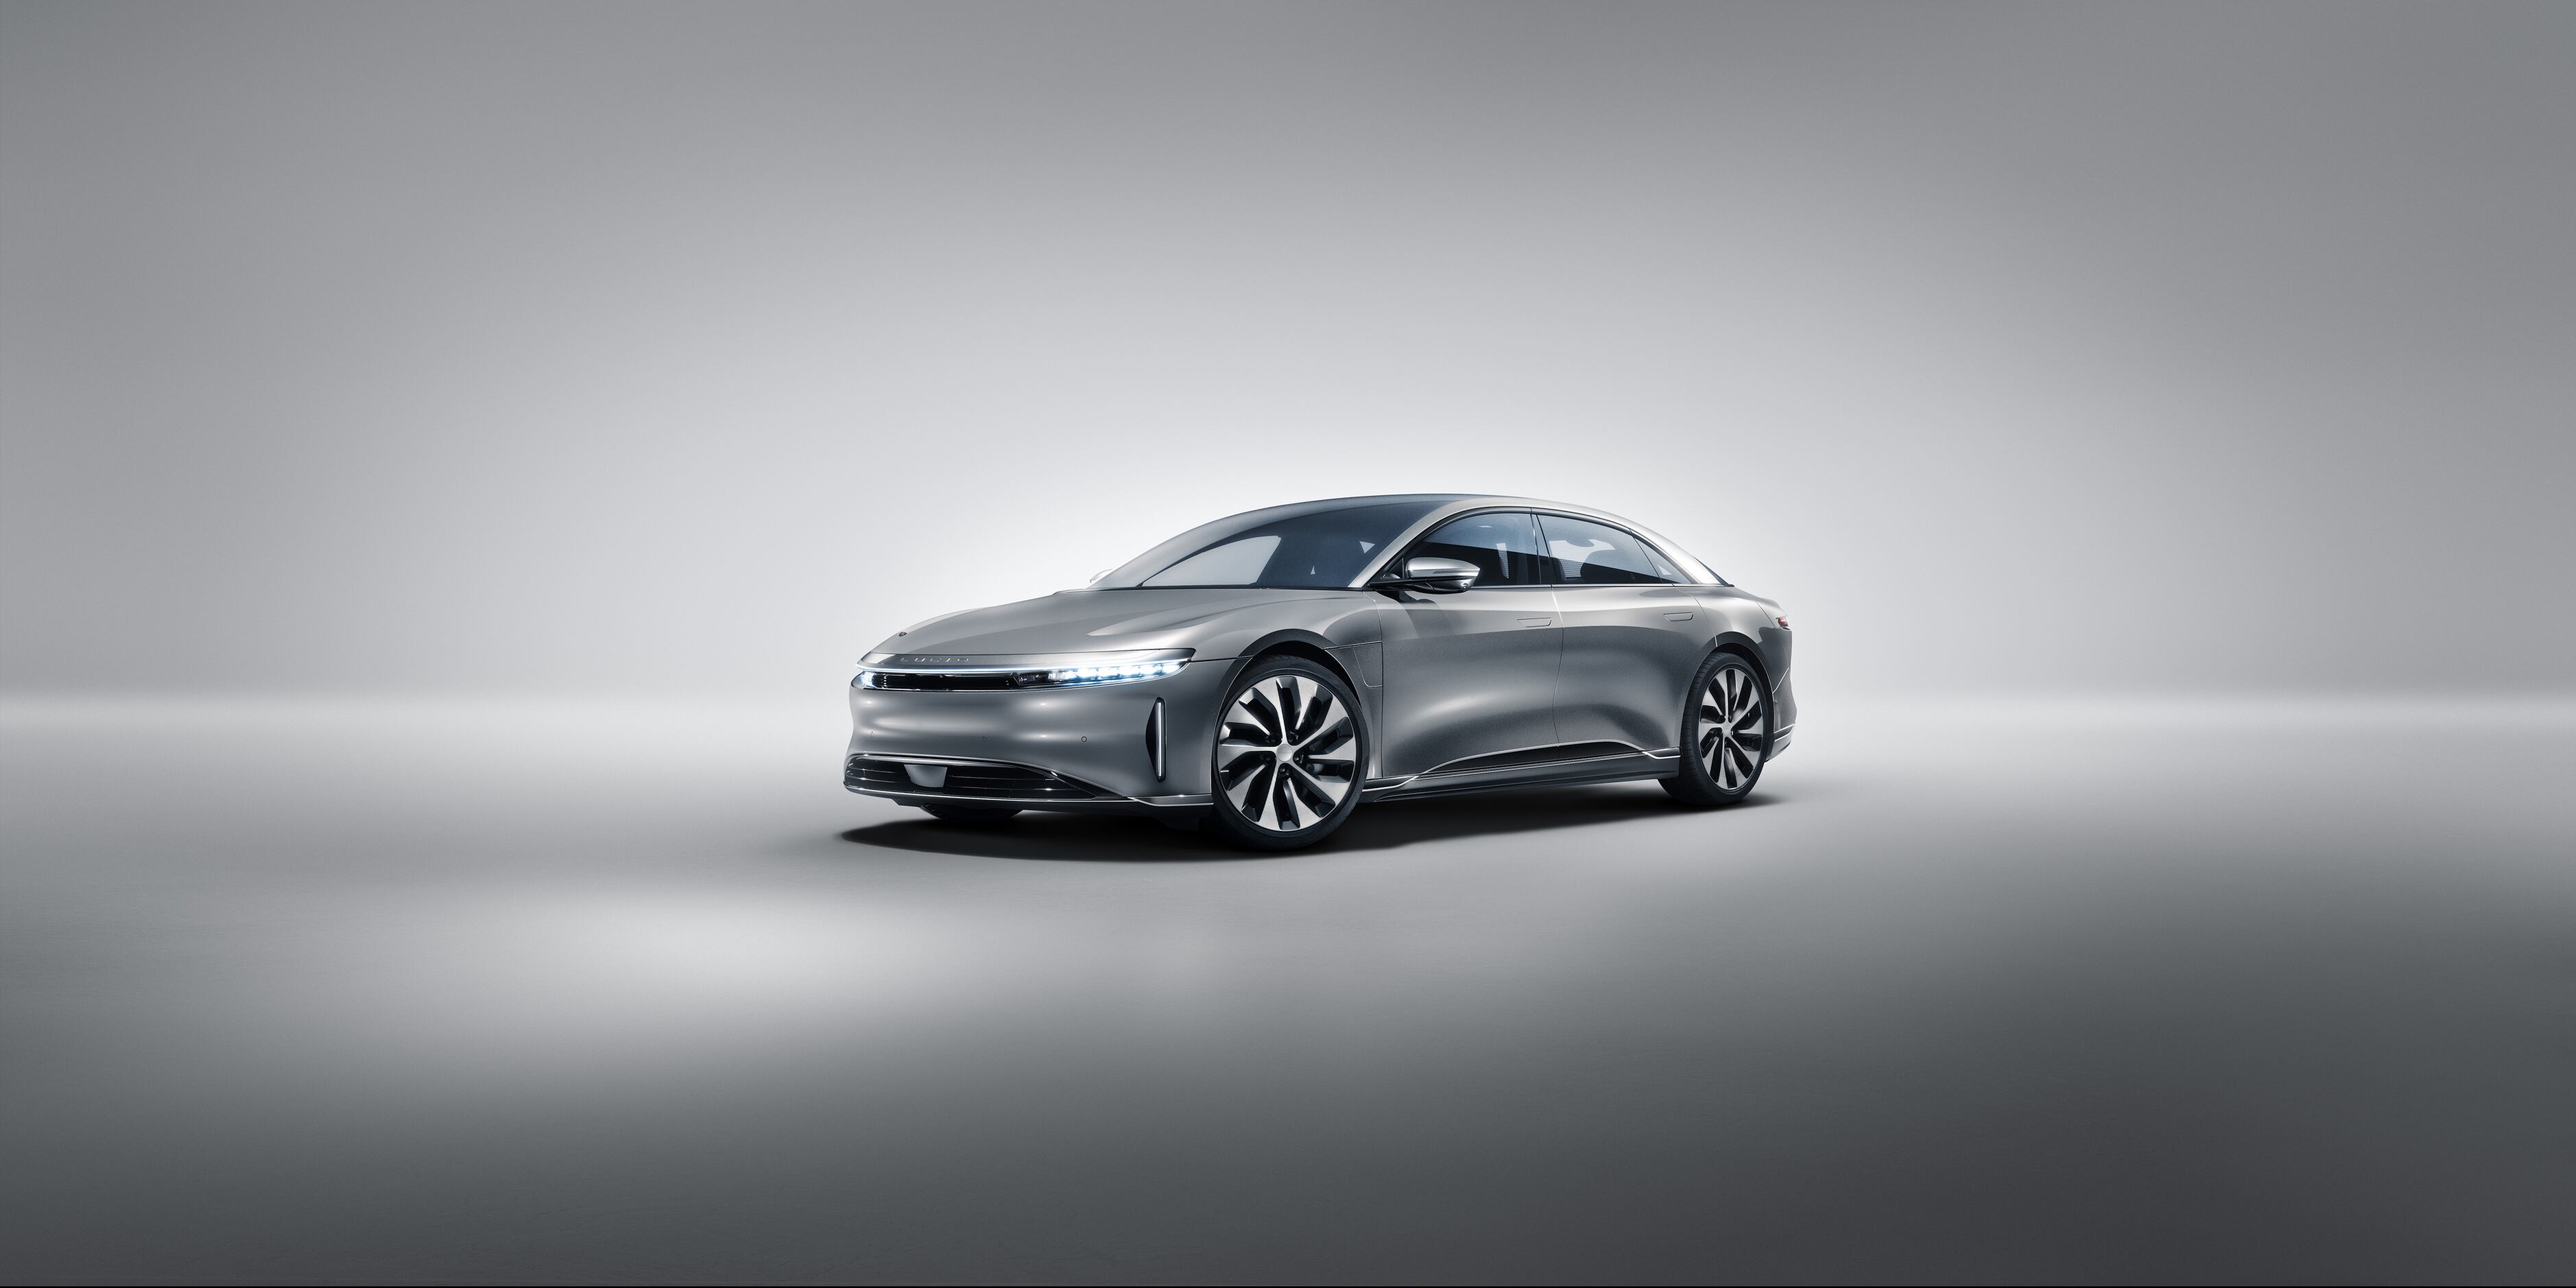 The Lucid Air Grand Touring